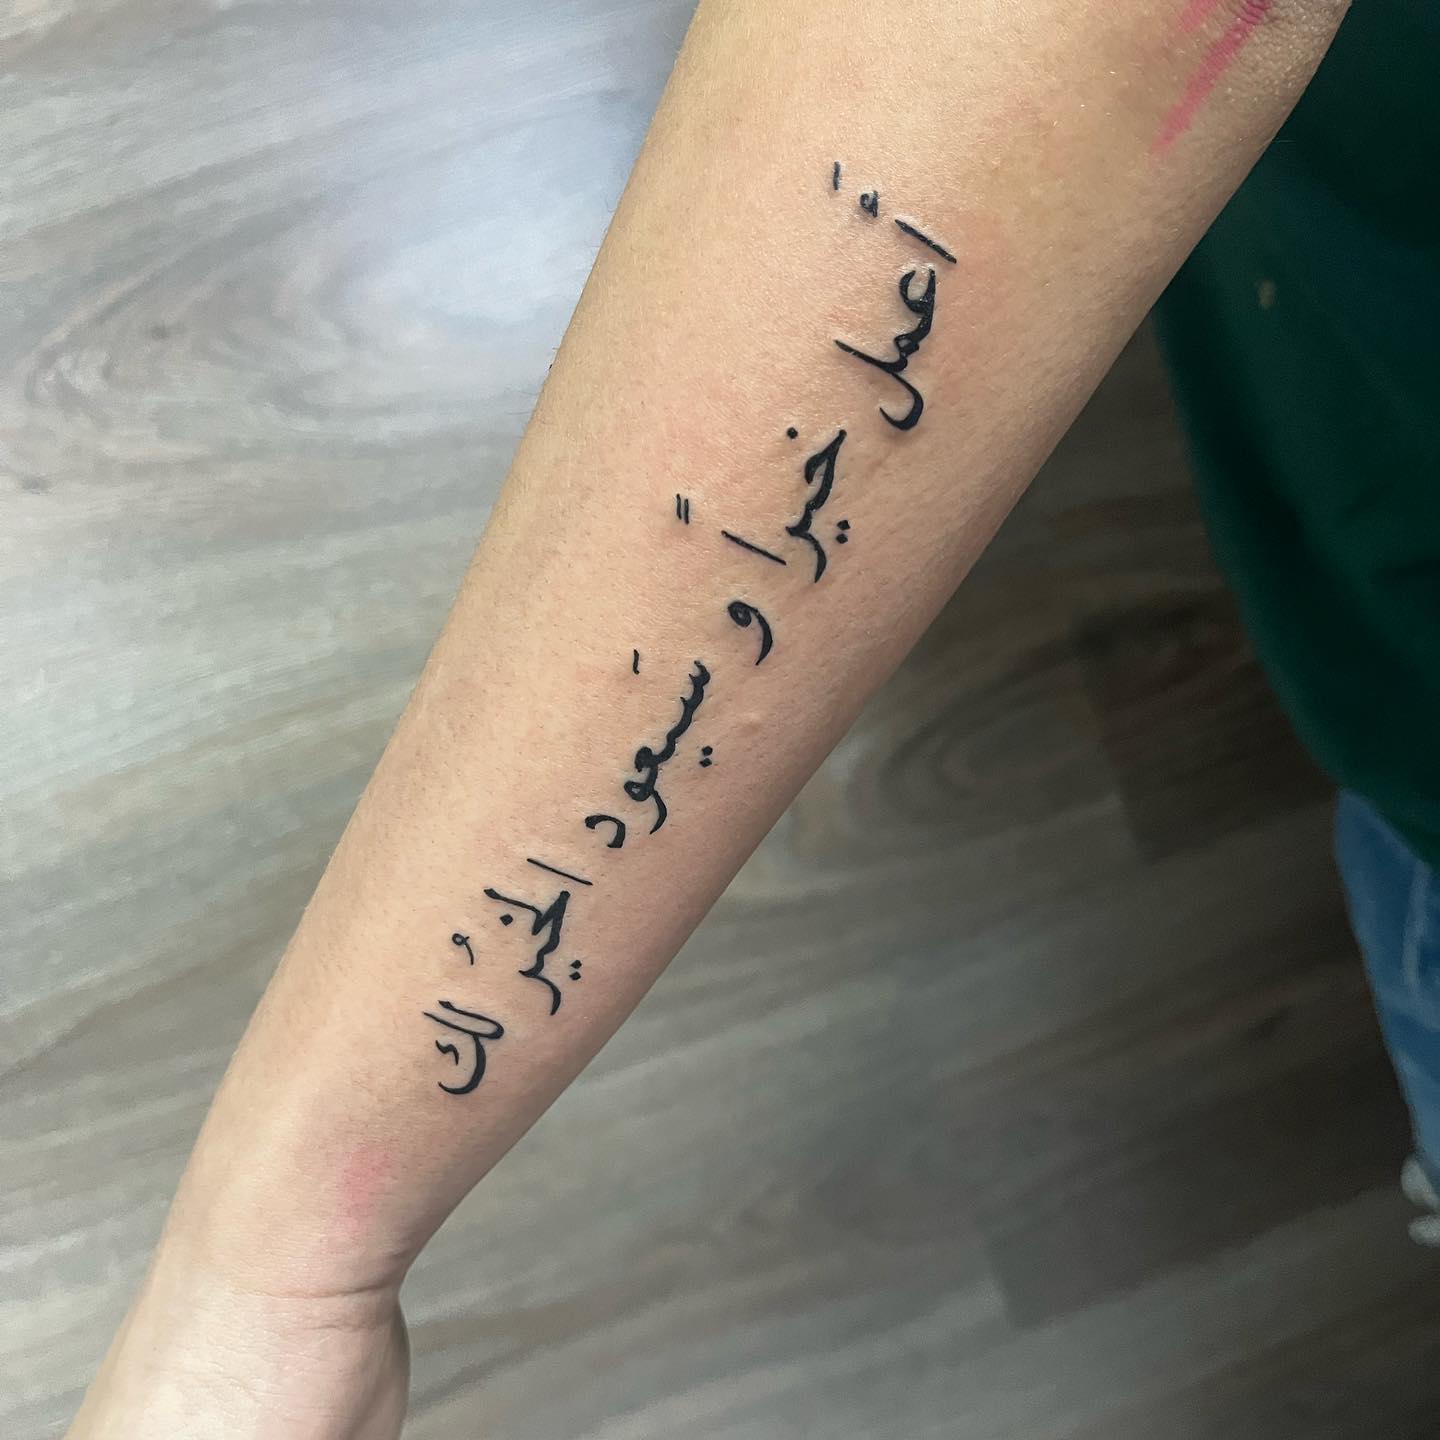 Are karma believers here? If yes, we have a great idea for you. The meaning of the tattoo above is 'Do good and good will come to you.'